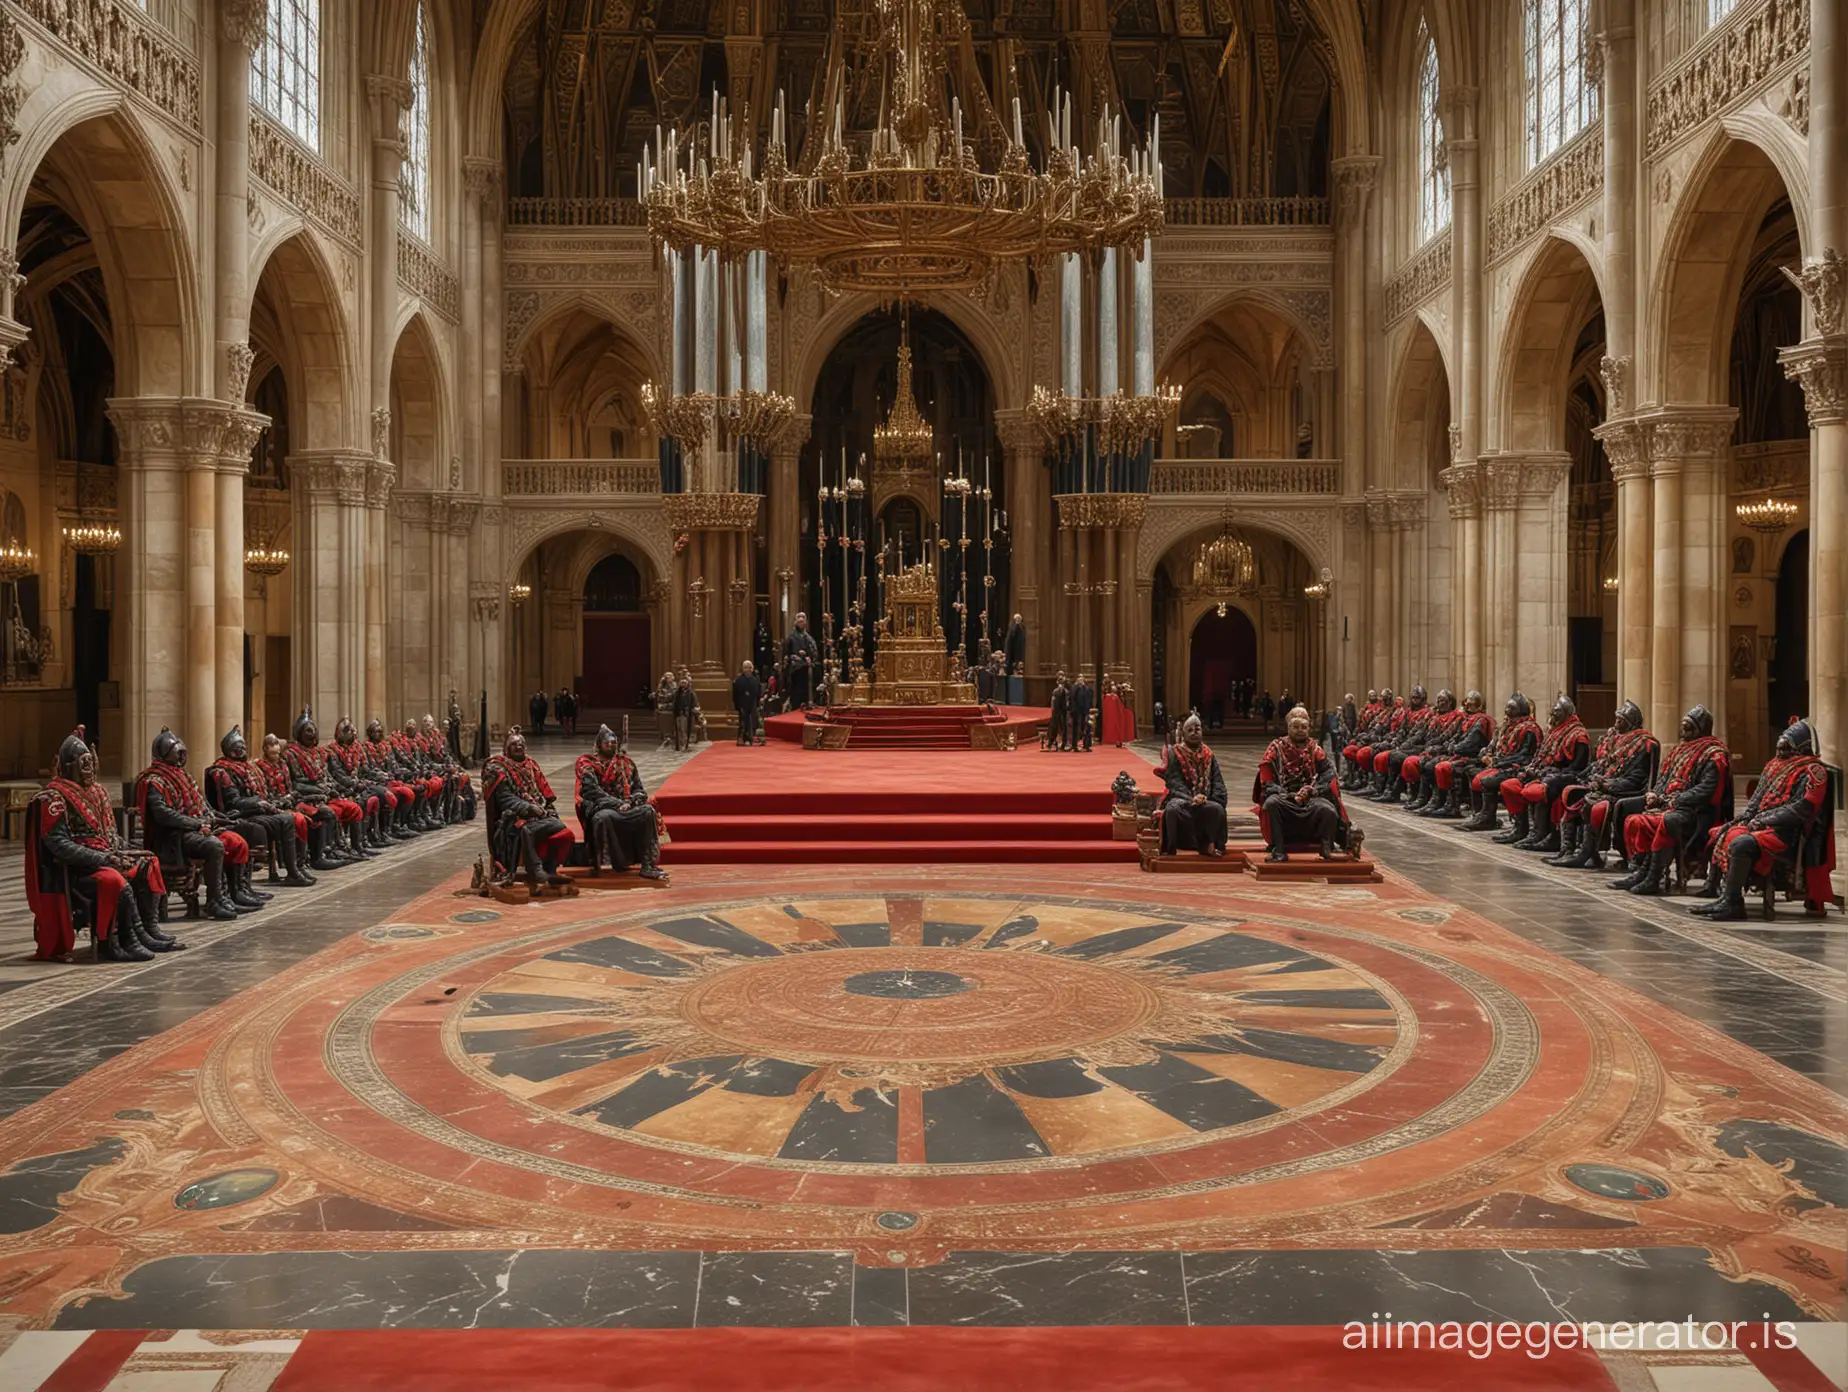 Ratking-on-Gothic-Throne-in-a-Grand-Hall-with-Rat-Soldiers-and-Planetary-Model